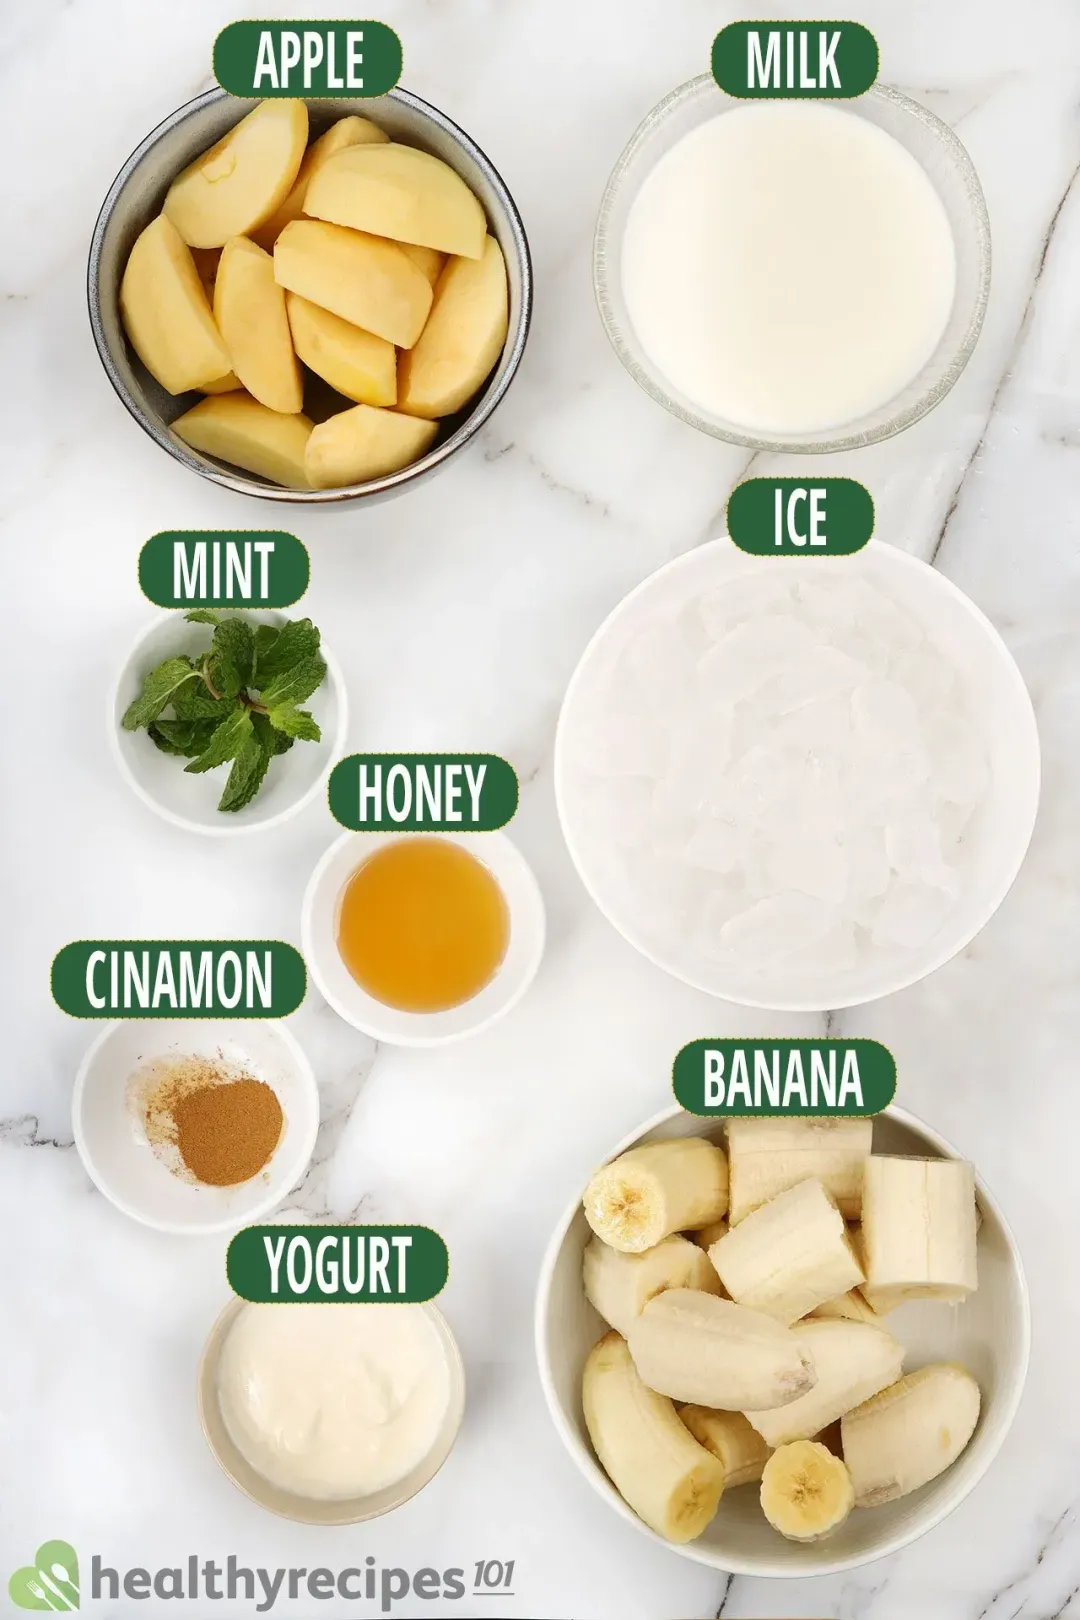 Ingredients for Apple Banana Smoothie